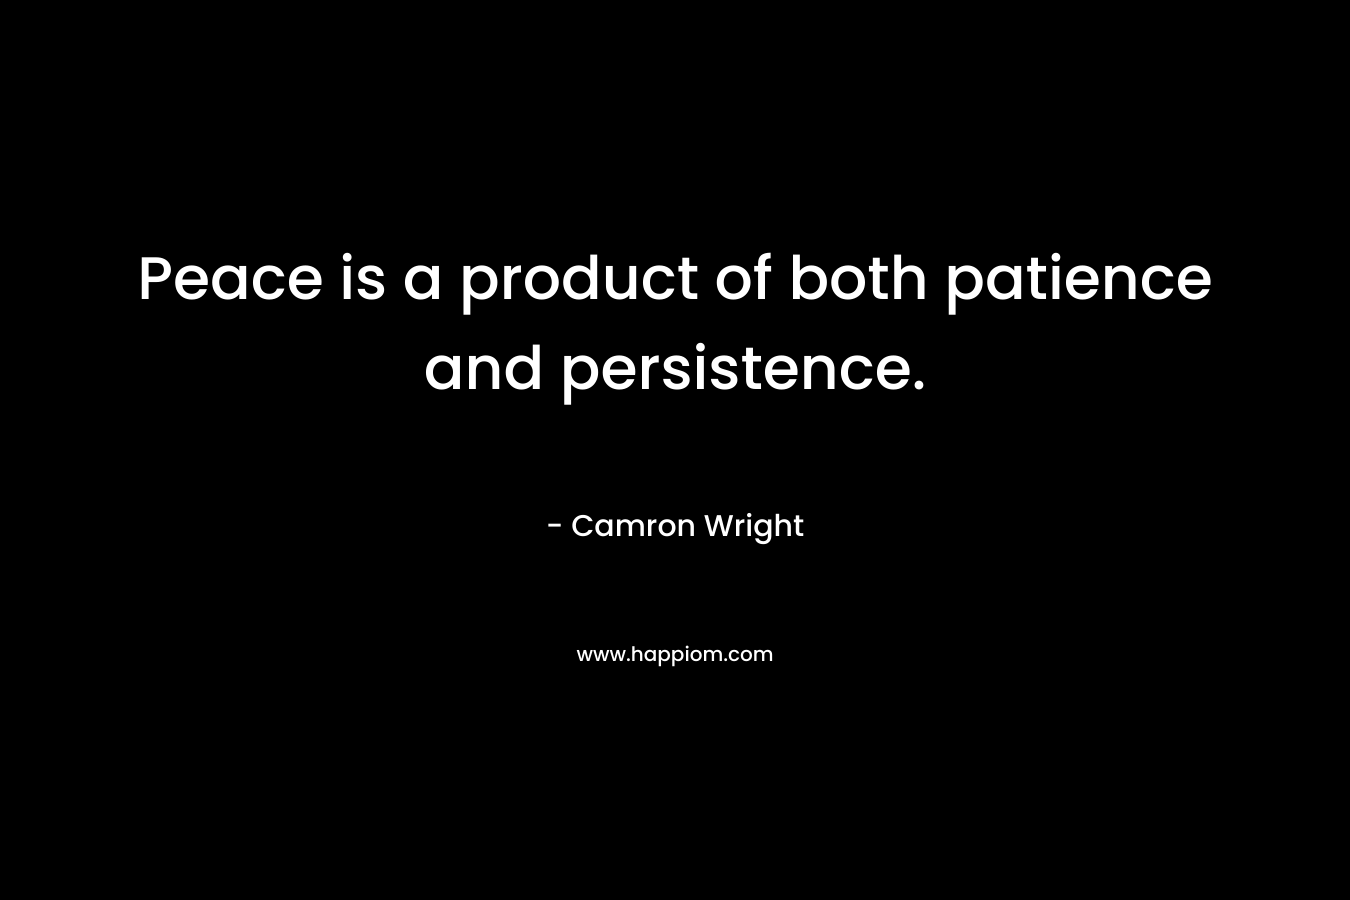 Peace is a product of both patience and persistence. – Camron Wright